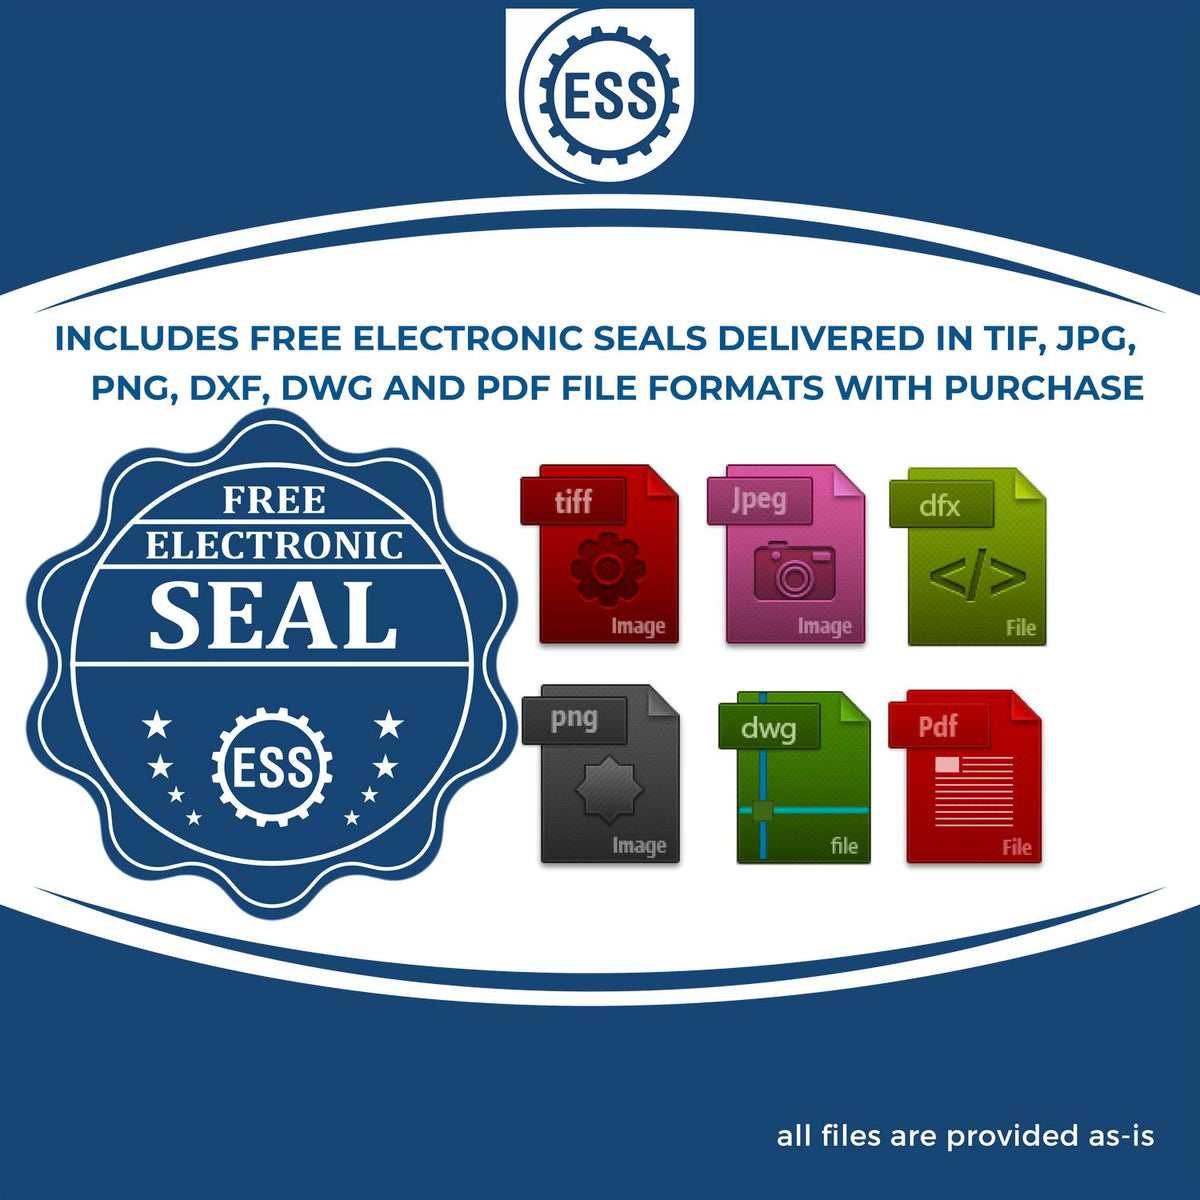 An infographic for the free electronic seal for the Michigan Geologist Desk Seal illustrating the different file type icons such as DXF, DWG, TIF, JPG and PNG.